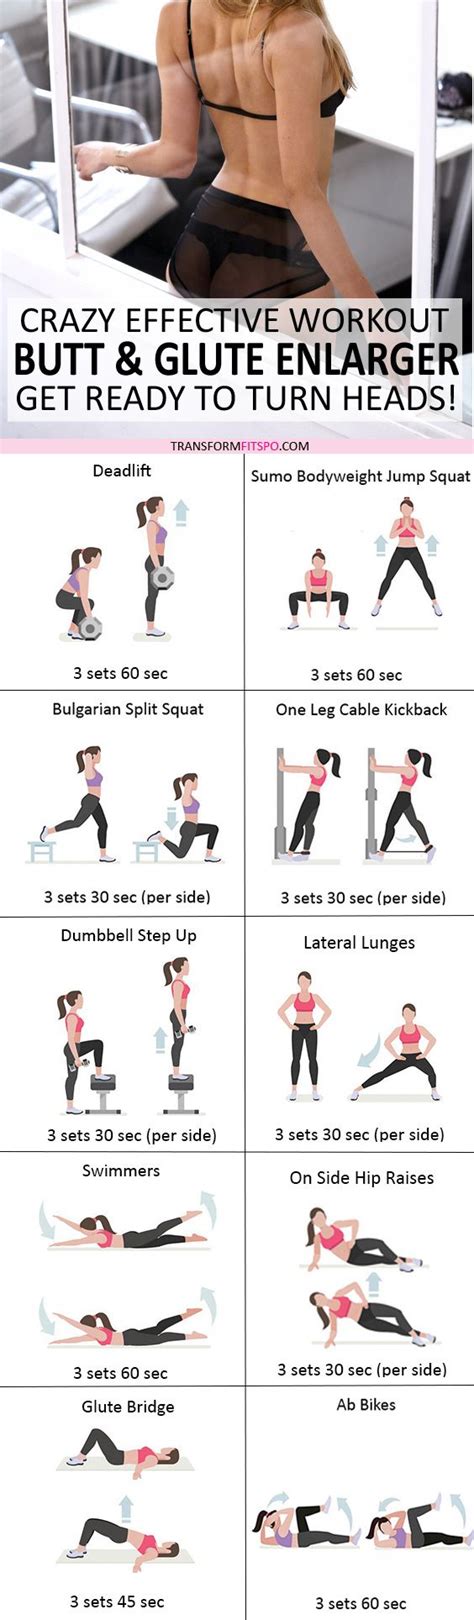 🍑 Compound Butt And Glute Enlarger Crazy Effective Workout For Booty